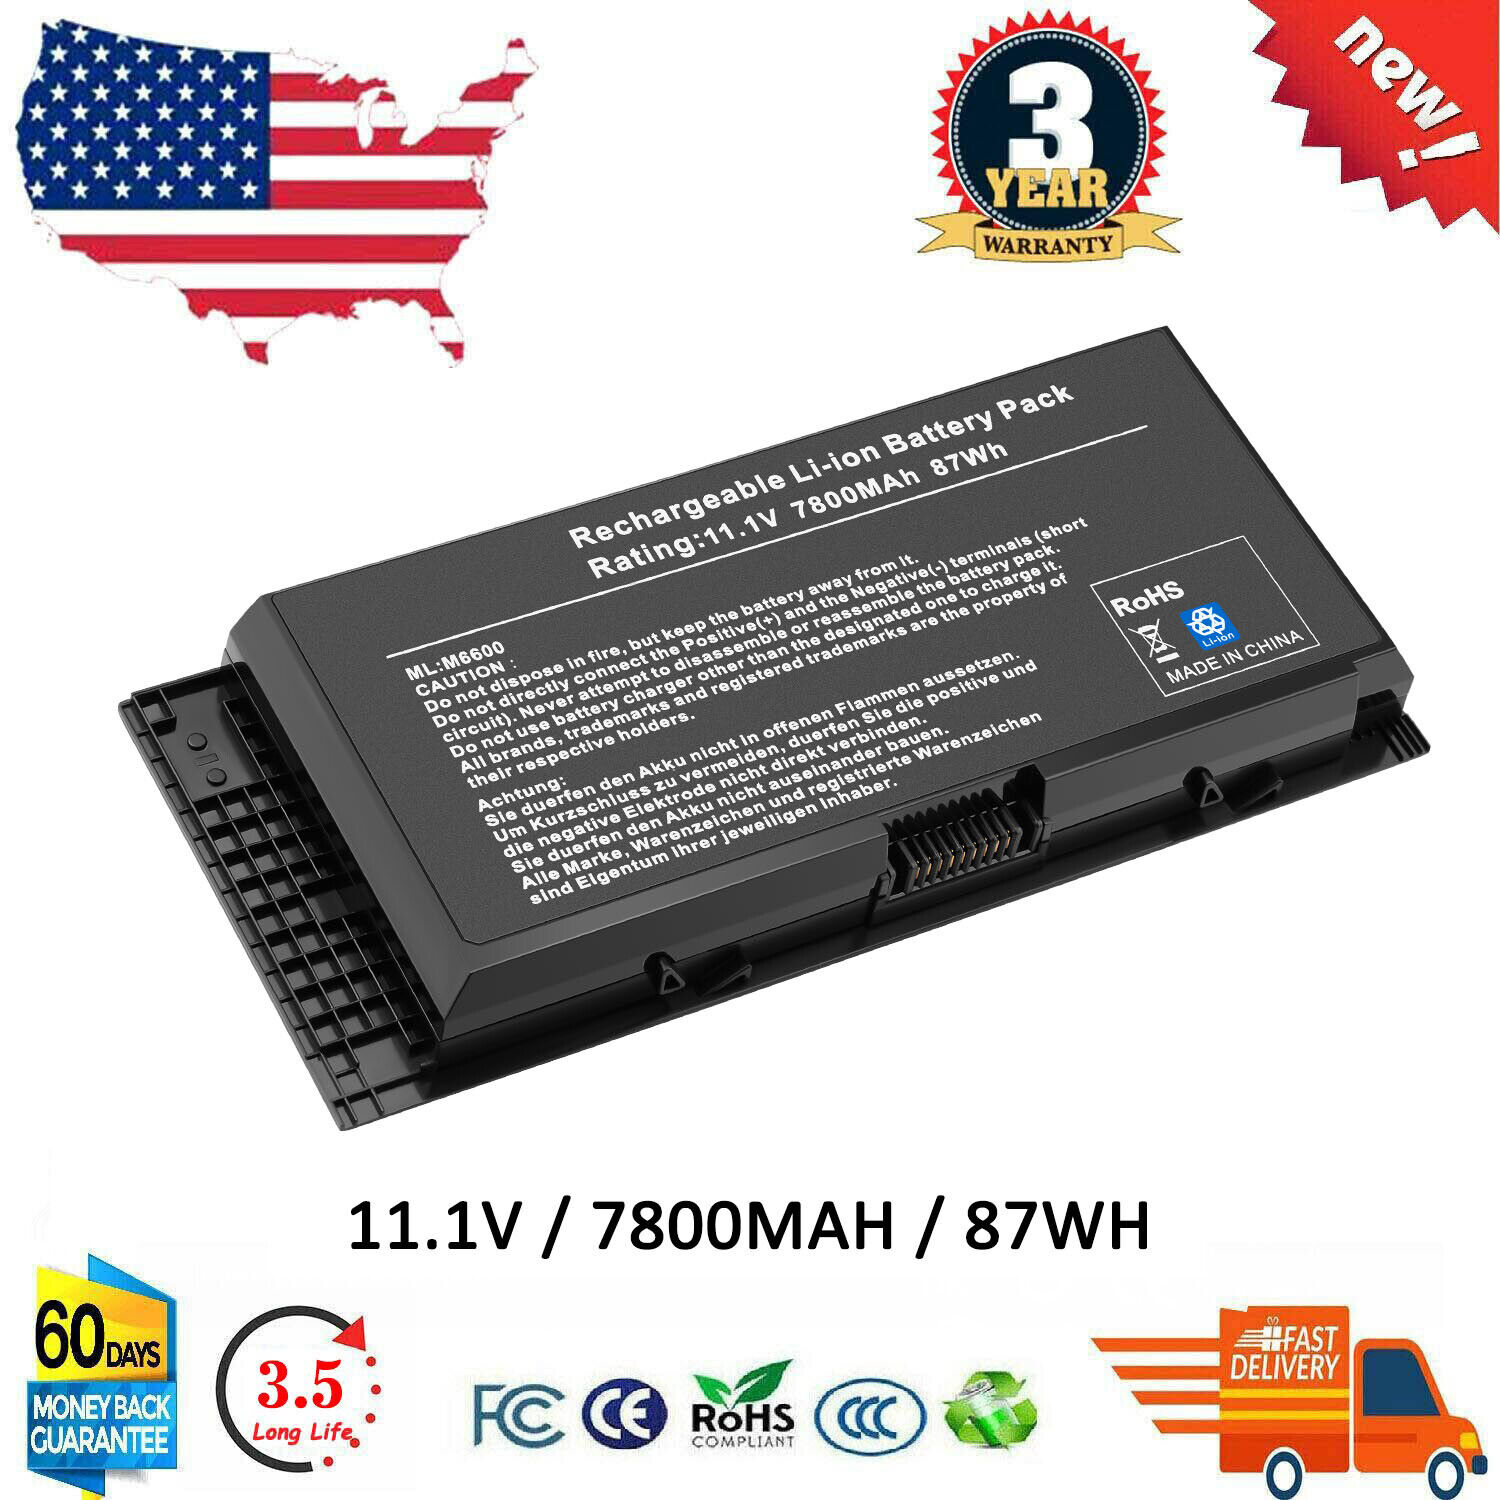 FV993 Battery For Dell Precision M6600 M4600 M4700 M4800 M6700 M6800 JHYP2 FJJ4W